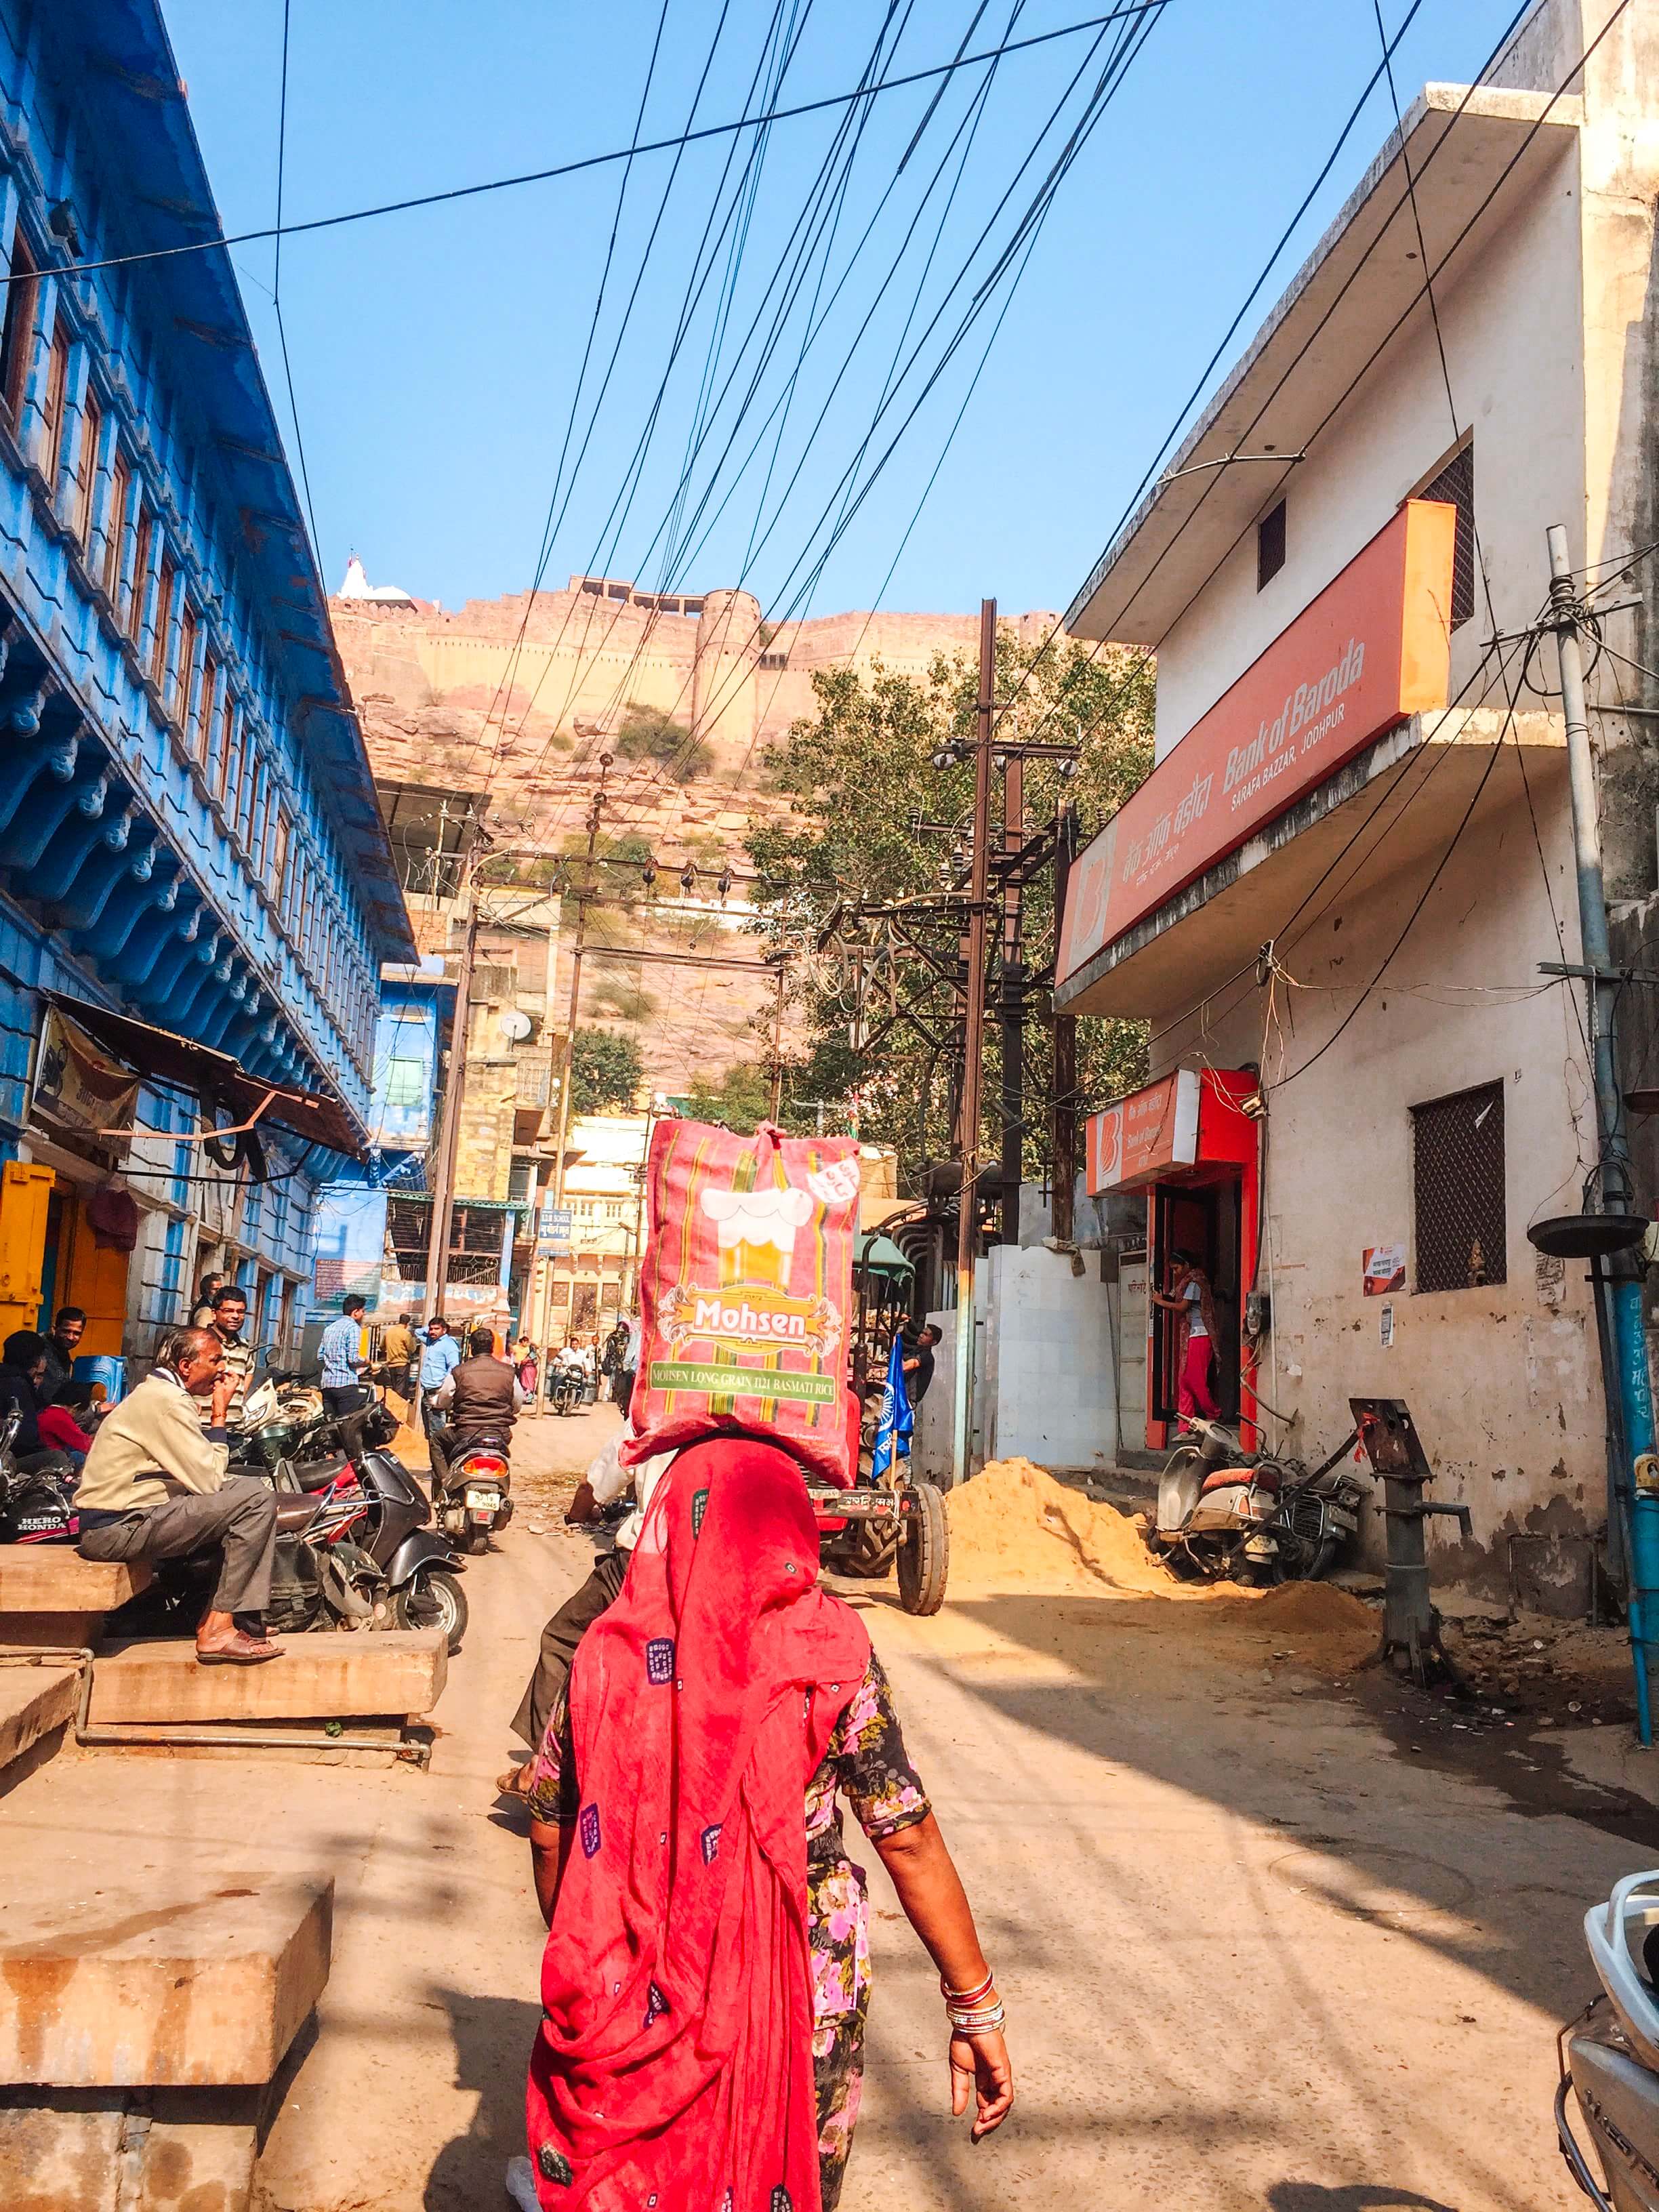 A woman in ruby expertly balancing rice on her head as she begins her ascent up the winding alleys and steeply inclined steps of the Blue City.